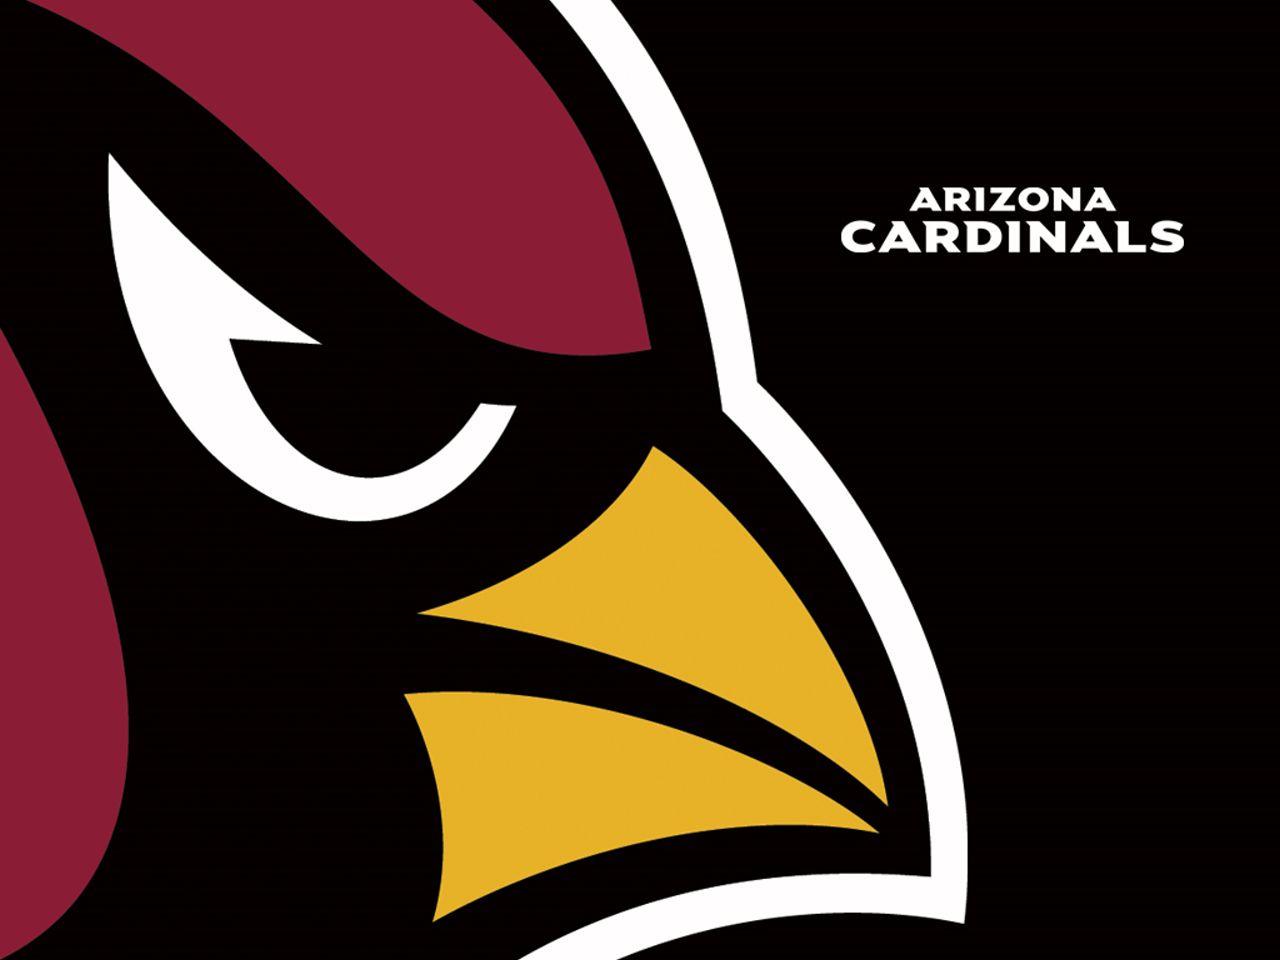 Download free arizona cardinals wallpaper for your mobile phone. i